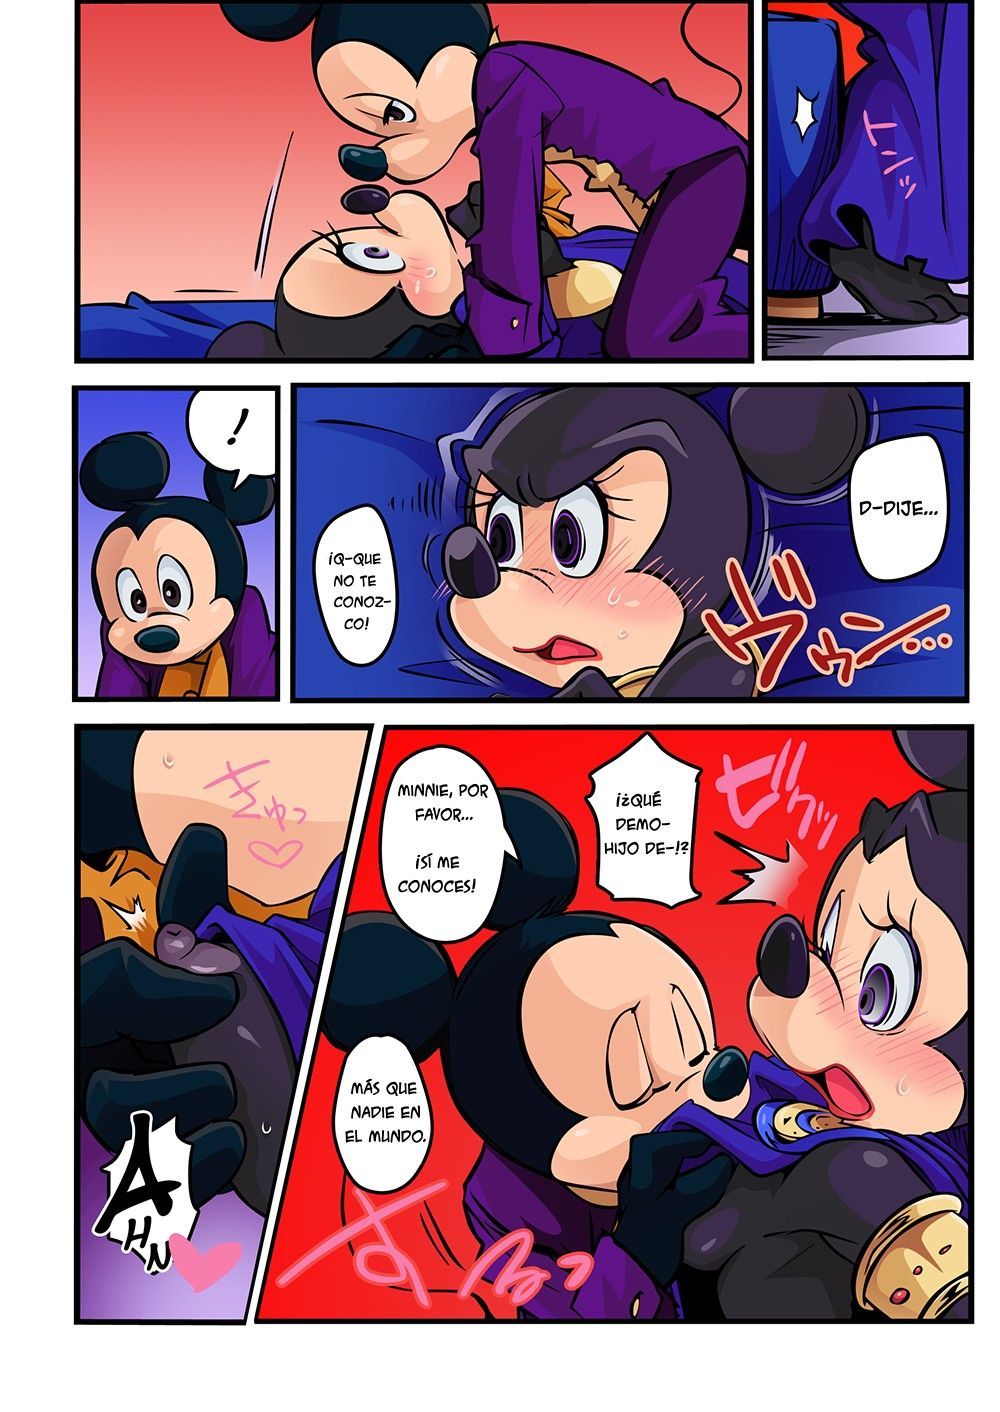 NFL recomended porn mickey mouse